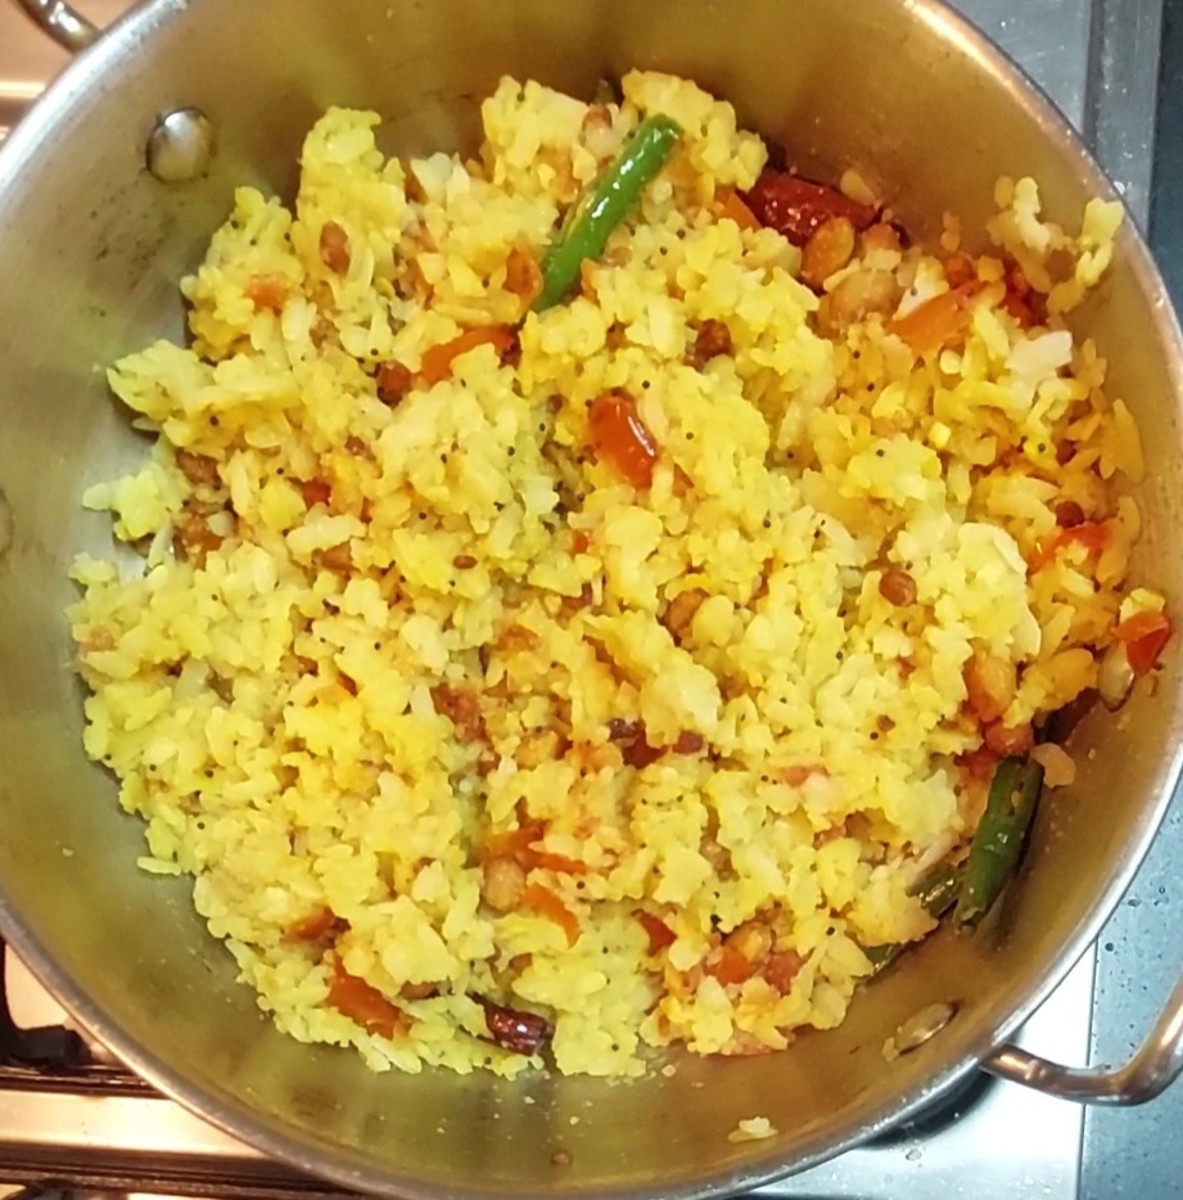 Mix well but take care not to not break the poha.